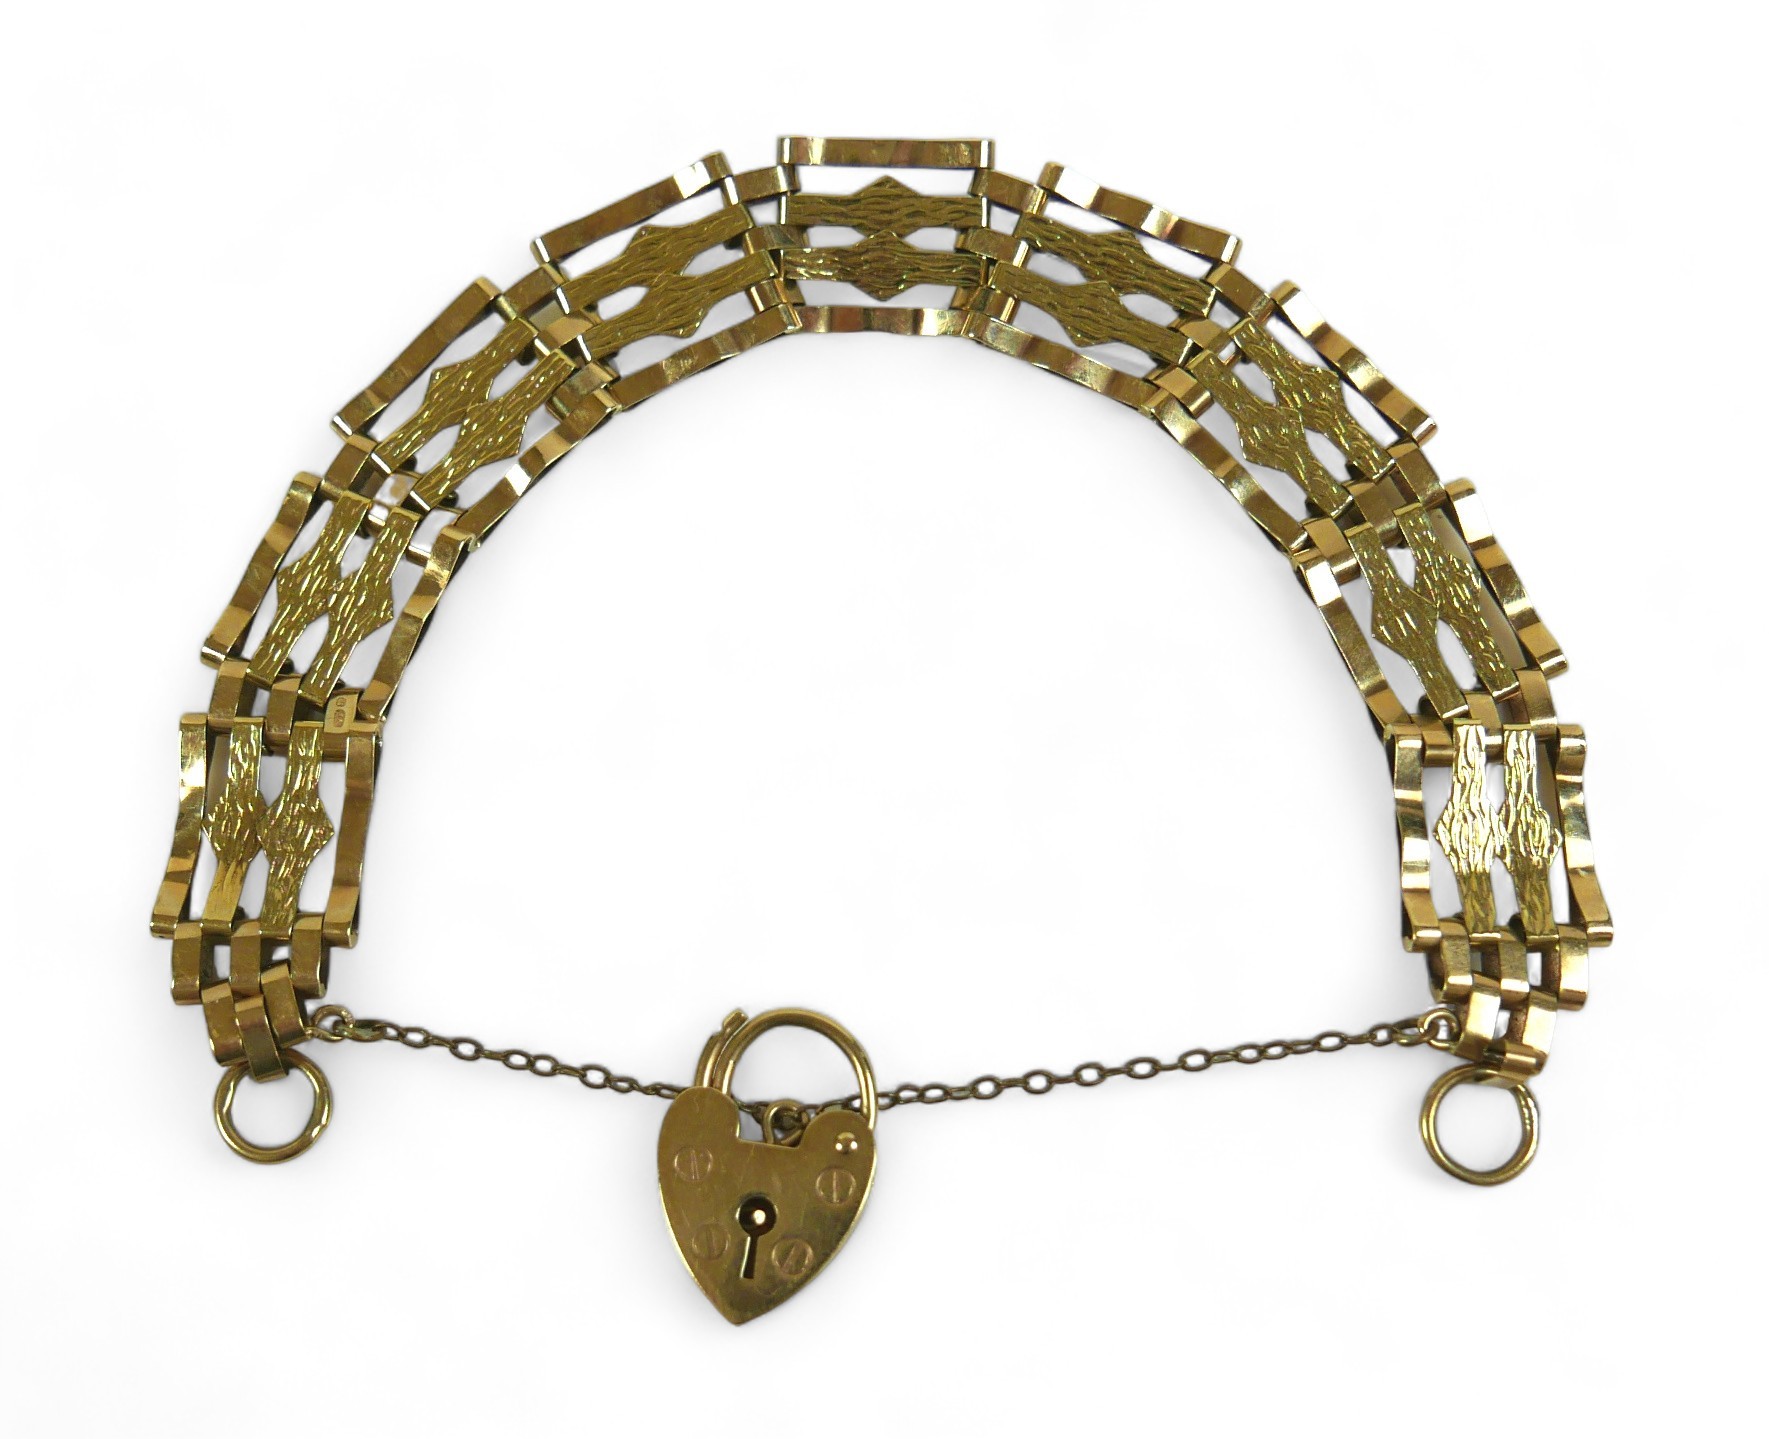 A 9ct gold bar gate bracelet with heart shaped lock and central textured bands, 10.6g. - Image 2 of 5